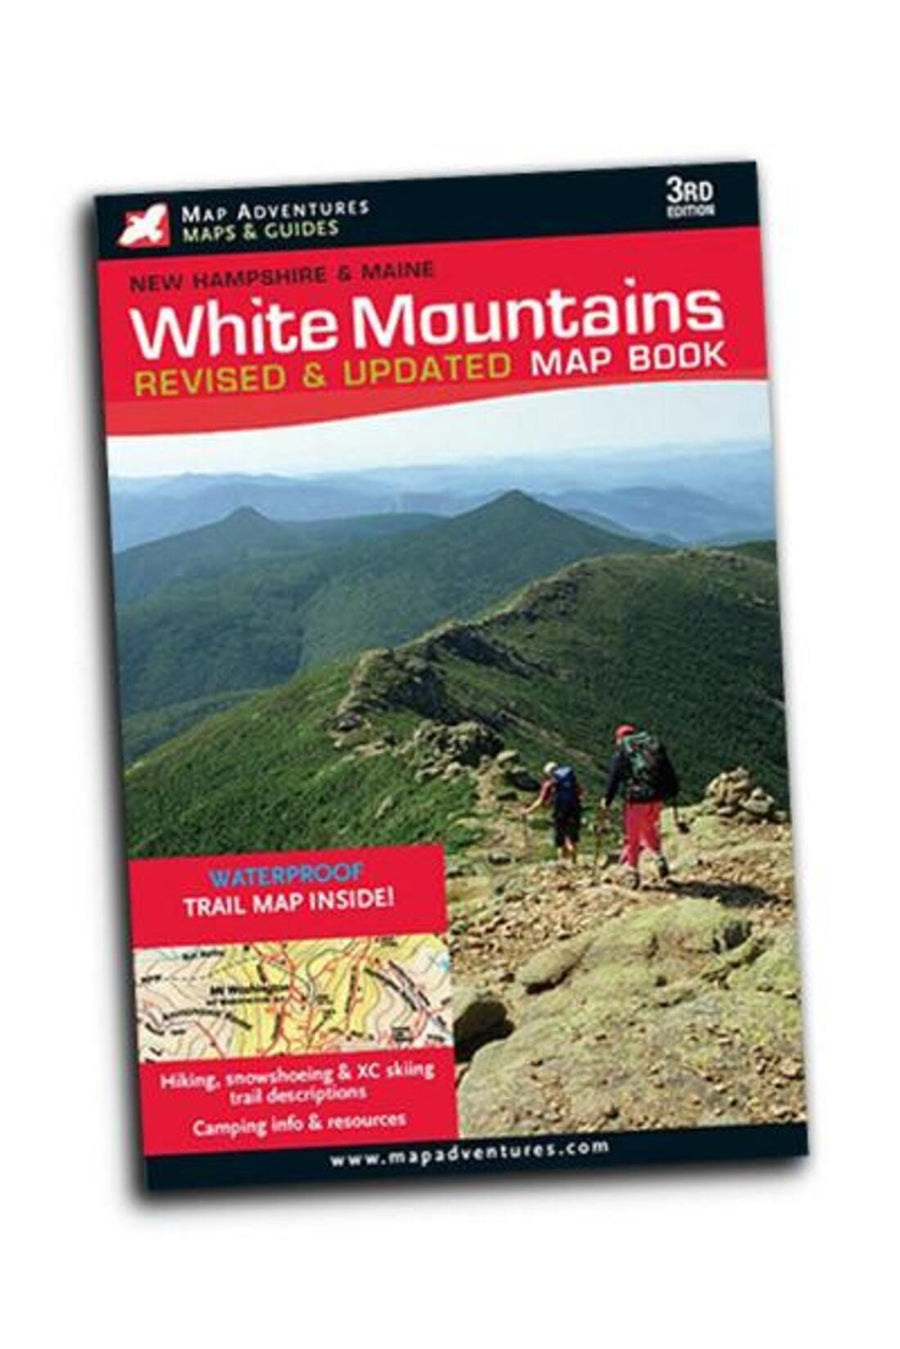 White Mountains Map Book Maine and New Hamshire | Map Adventures carte pliée 